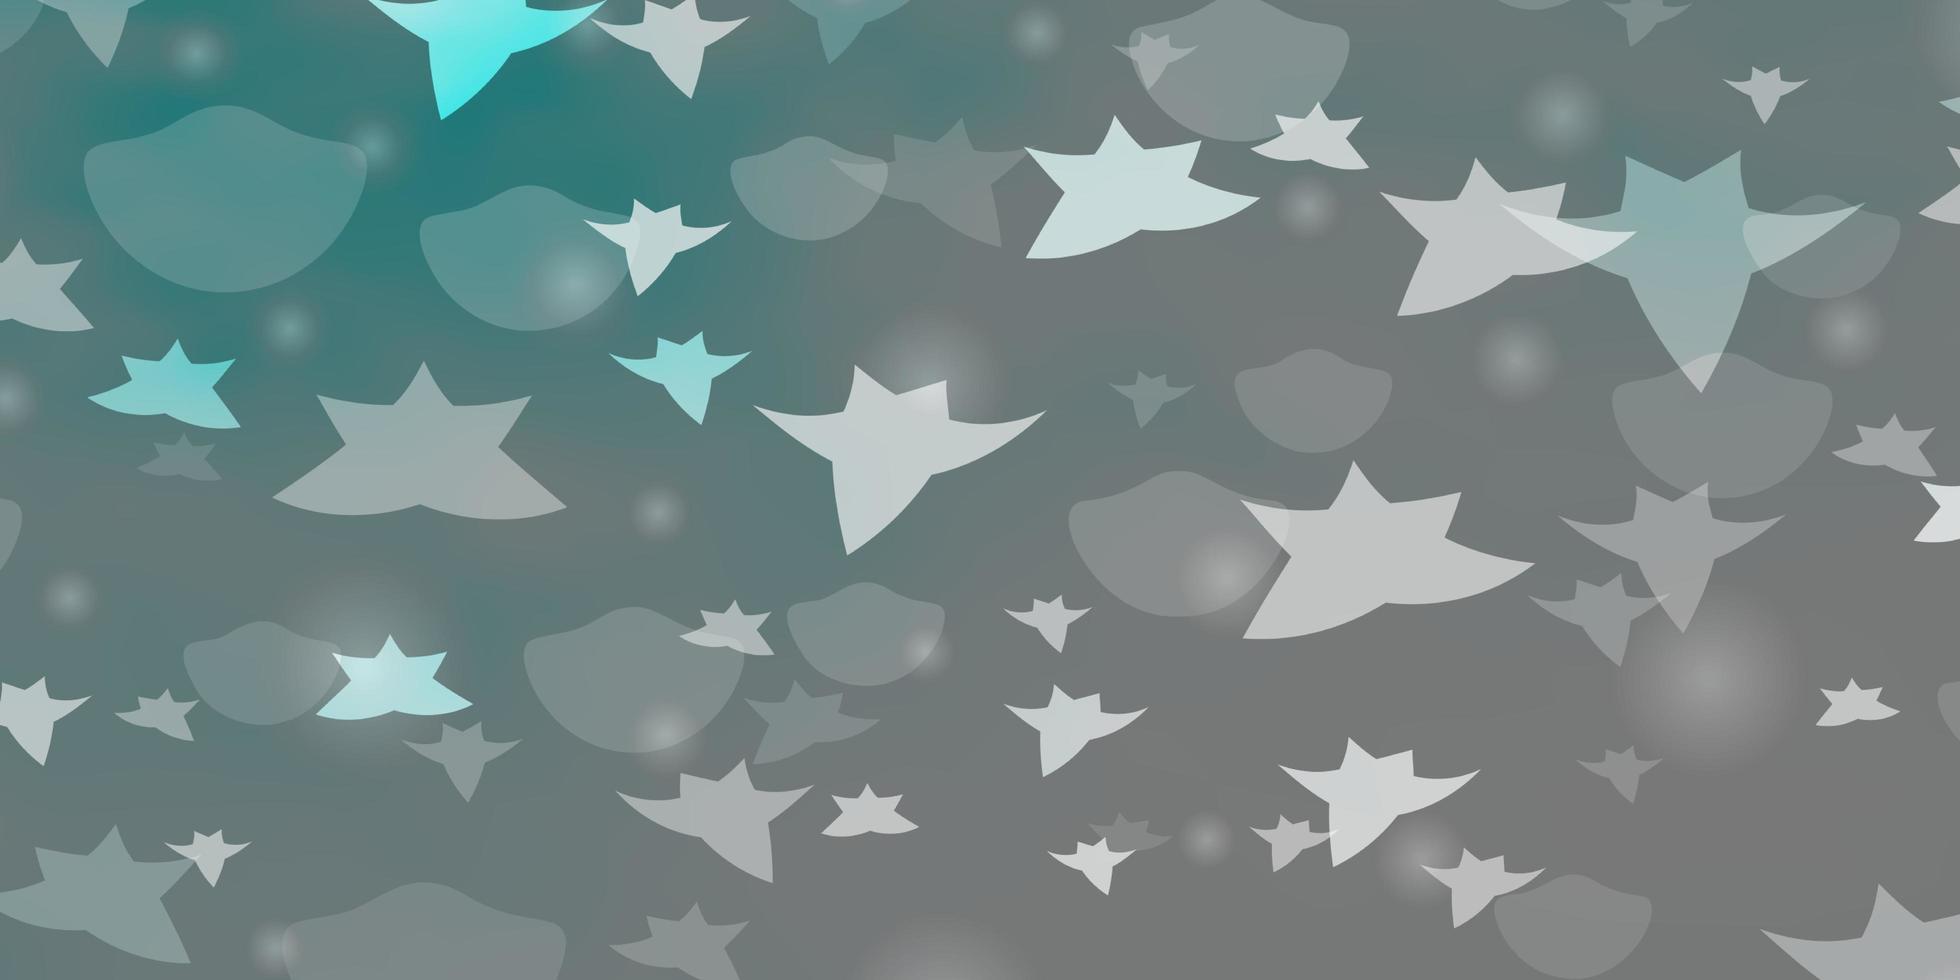 Light BLUE vector background with circles, stars